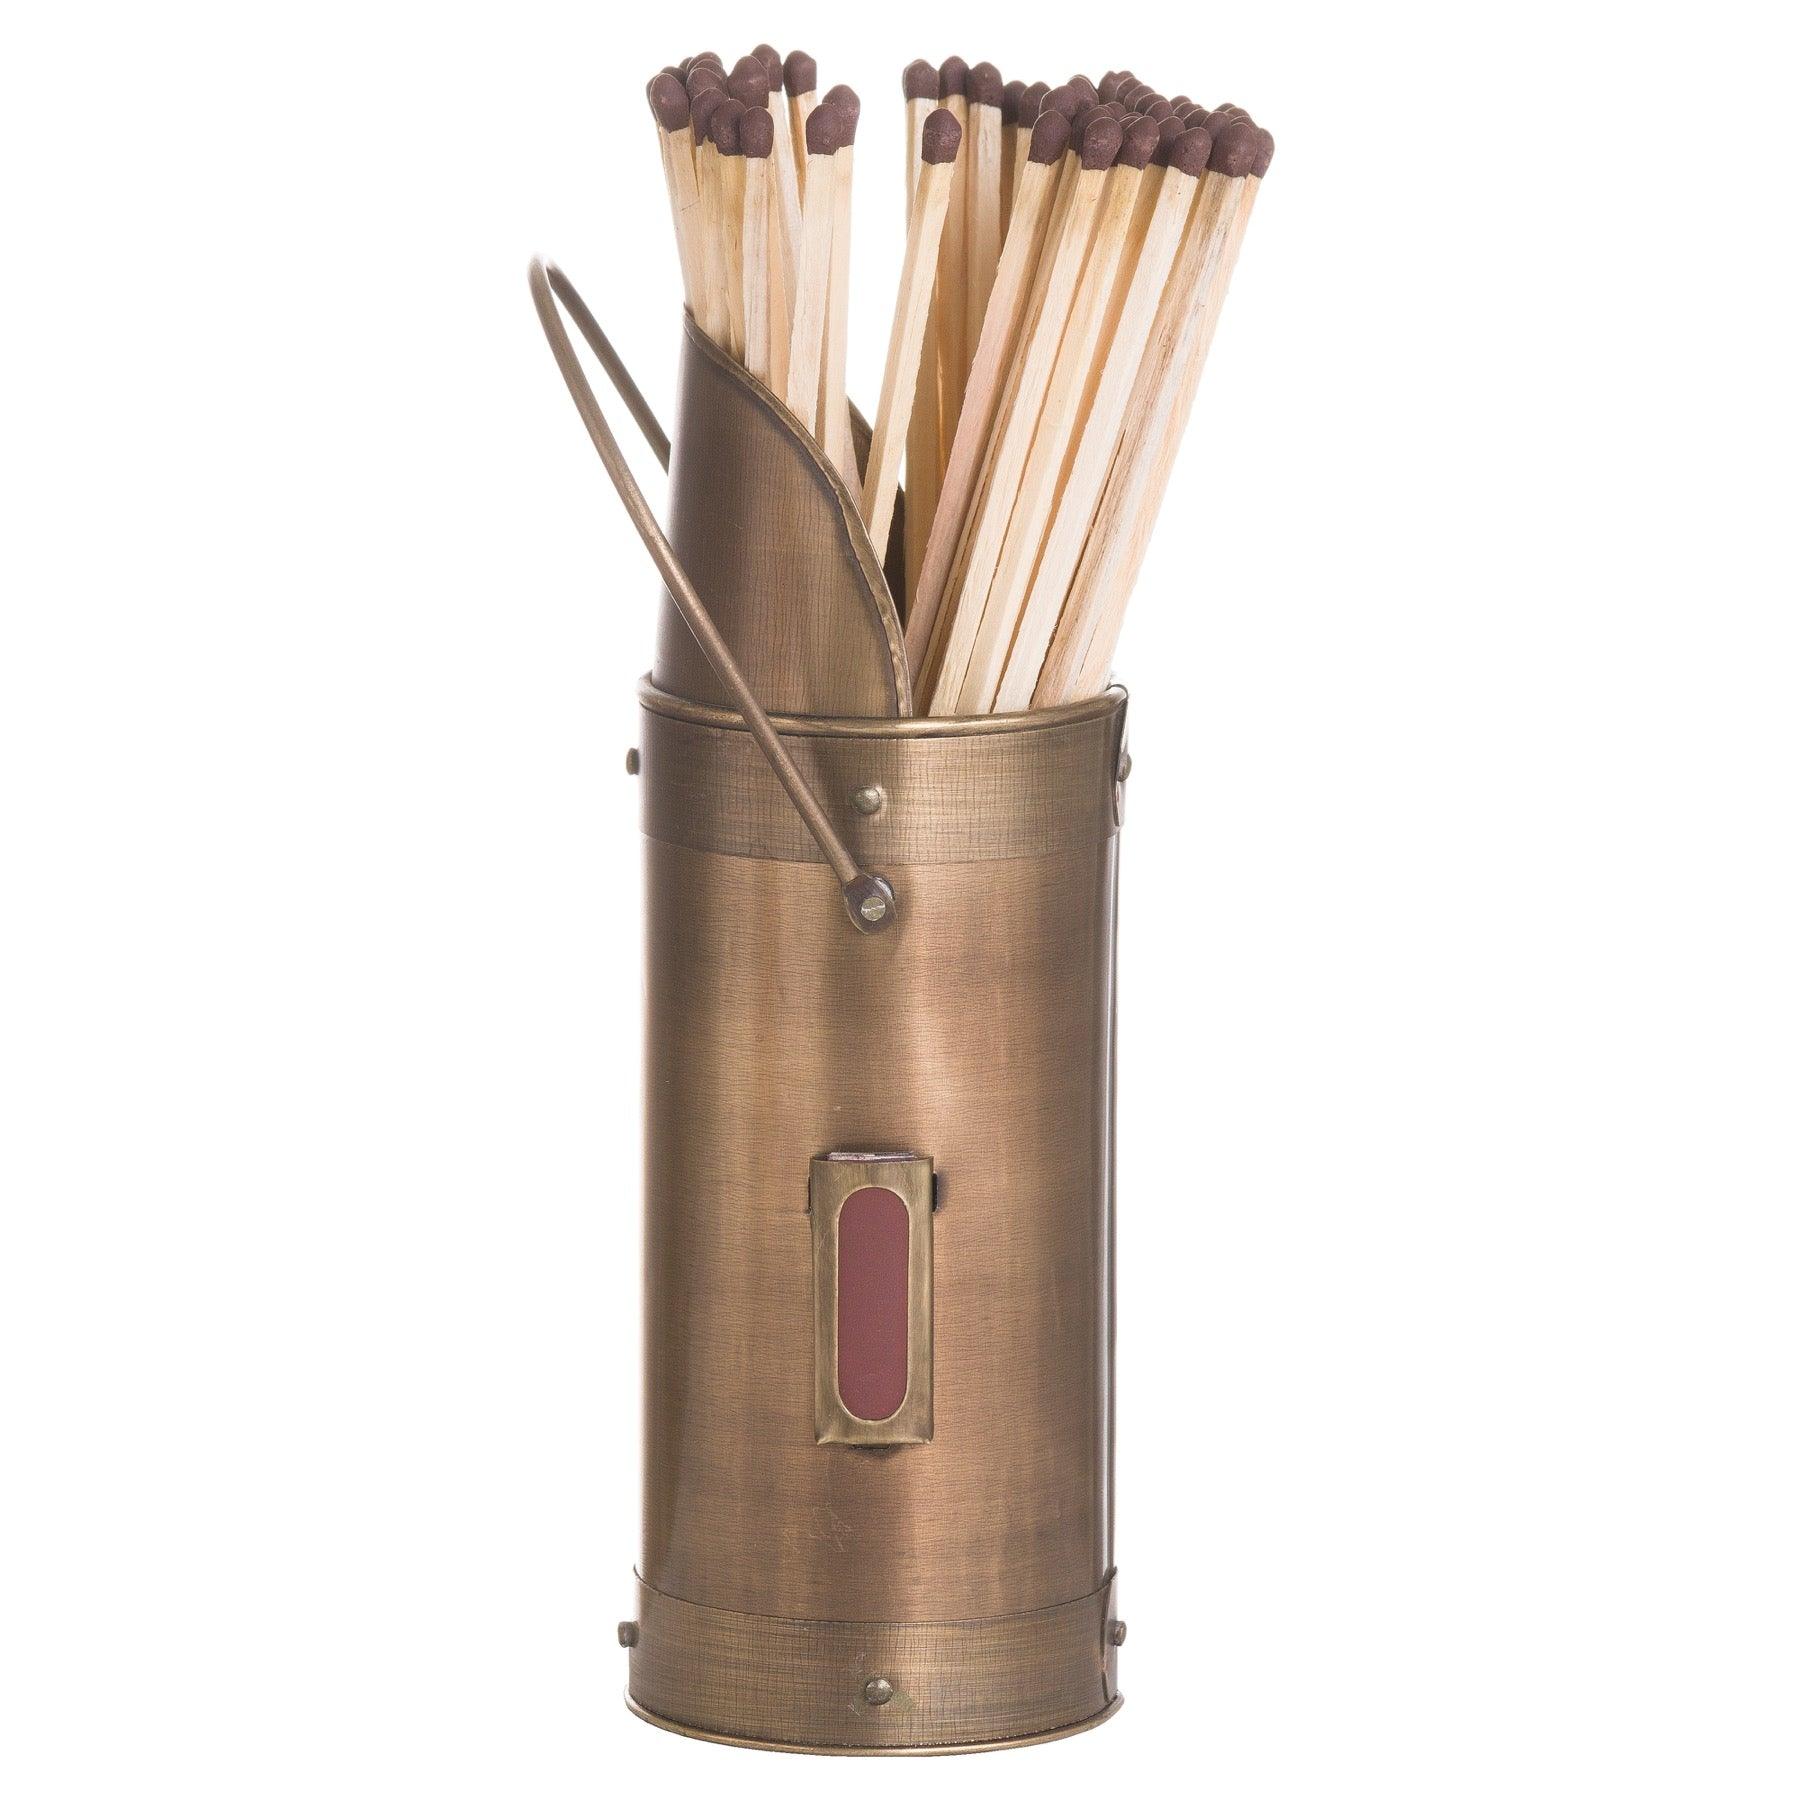 Antique Bronze Matchstick Holder With 60 Matches - Vookoo Lifestyle